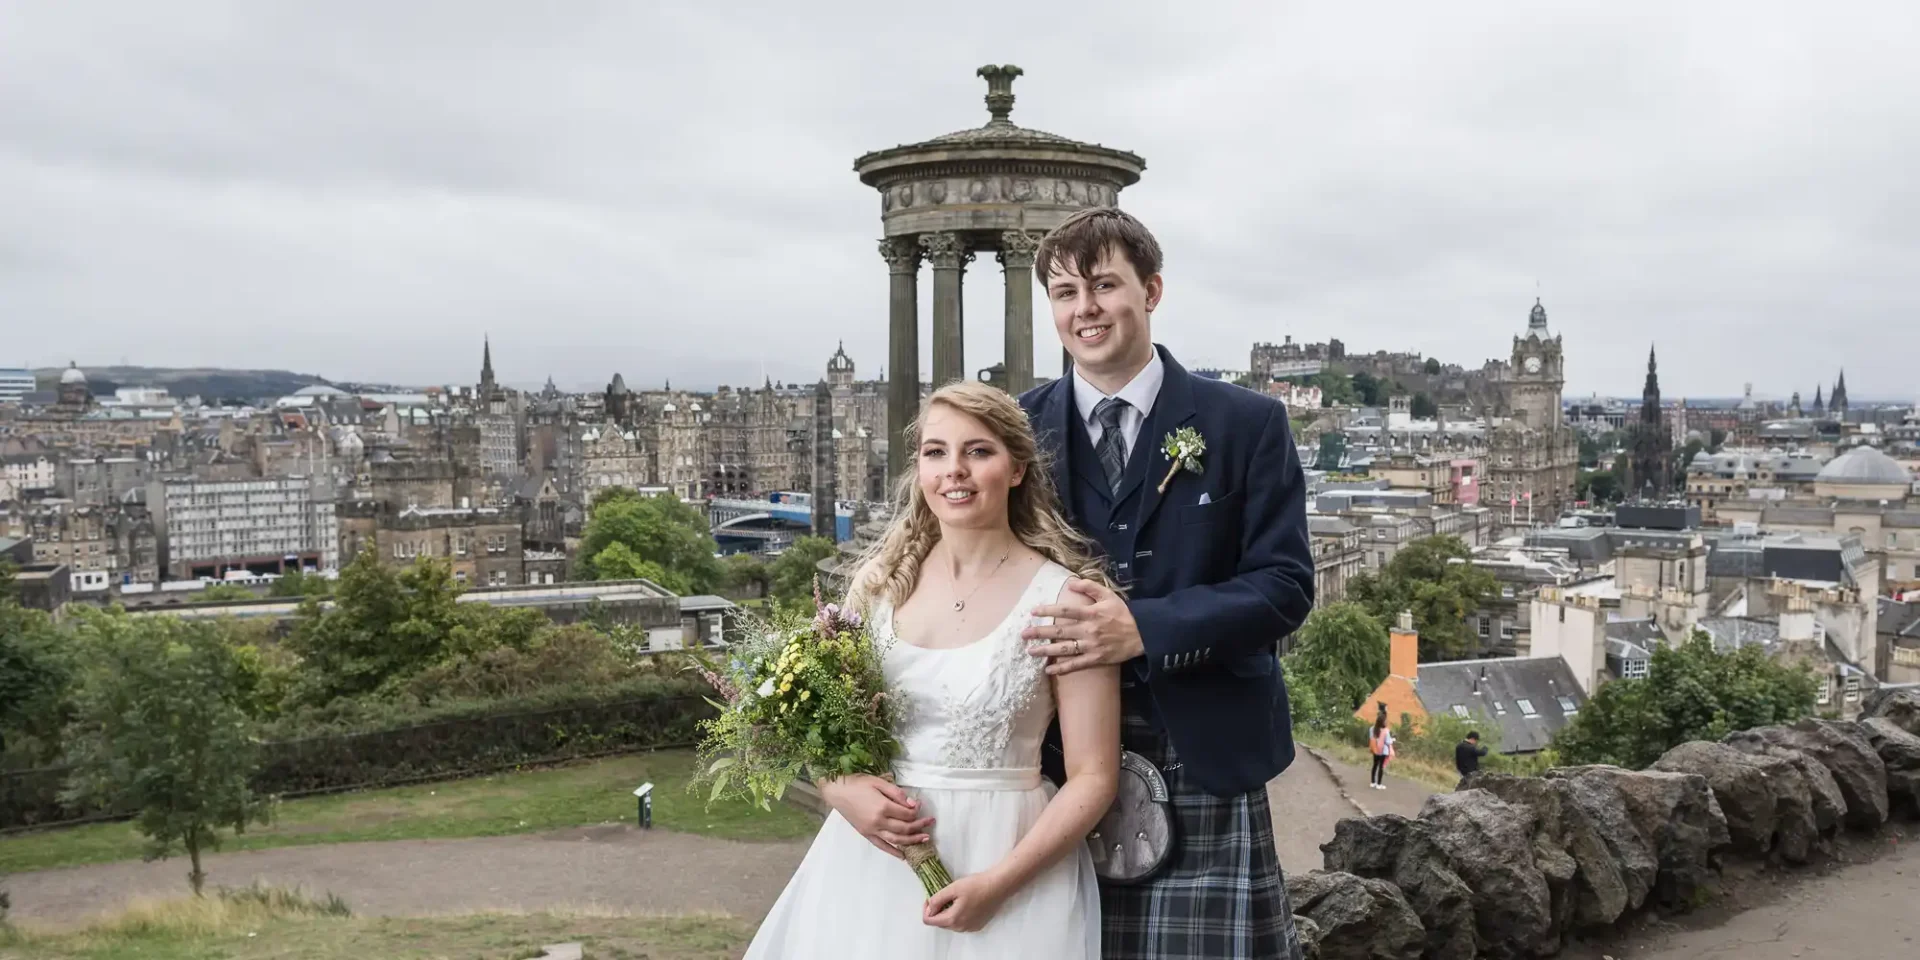 A newlywed couple posing with calton hill and edinburgh cityscape in the background. the groom wears a kilt, and the bride holds a bouquet.